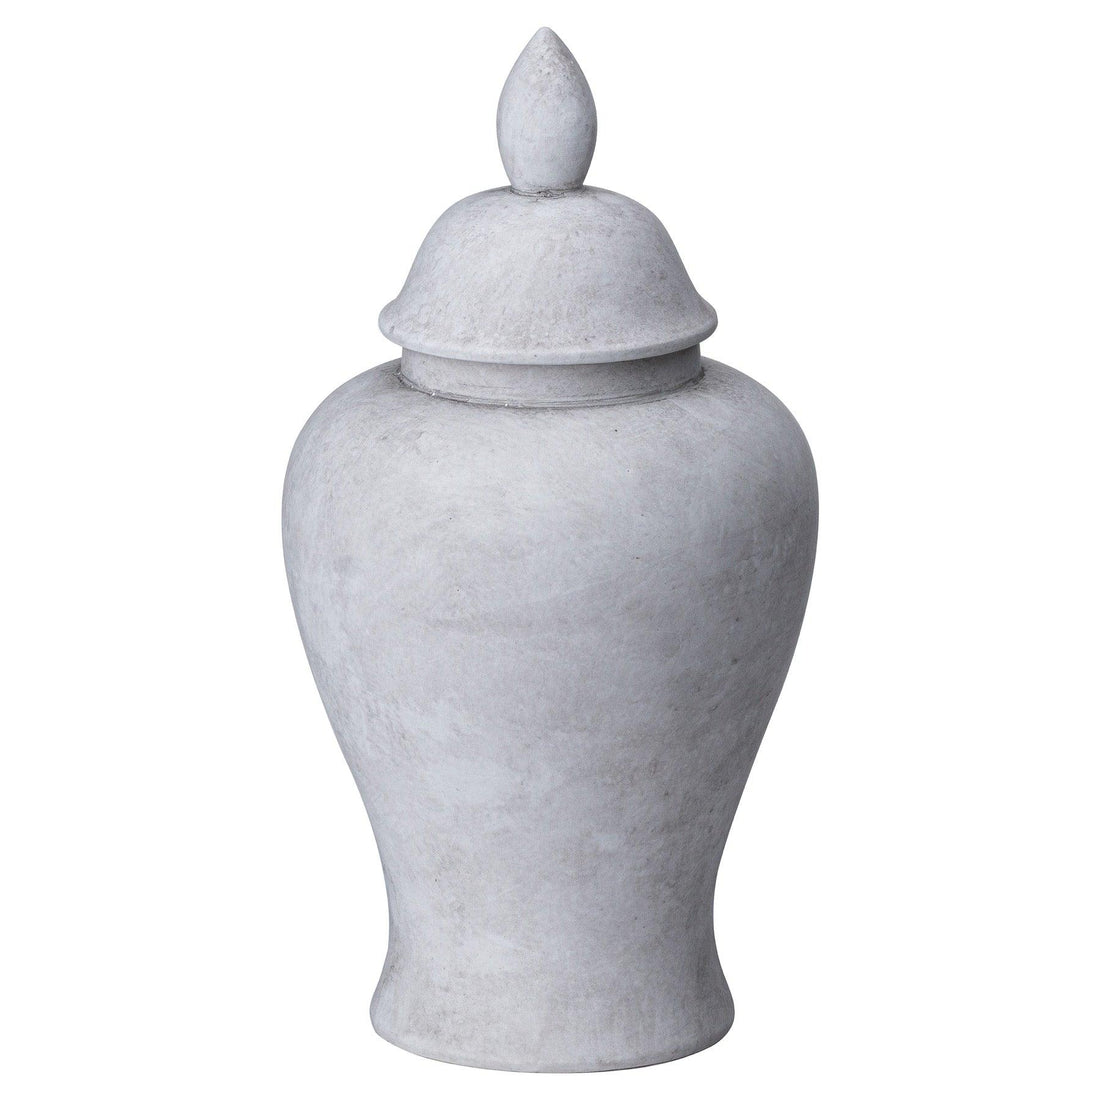 Darcy Stone Ginger Jar - £44.95 - Gifts & Accessories > Ornaments 